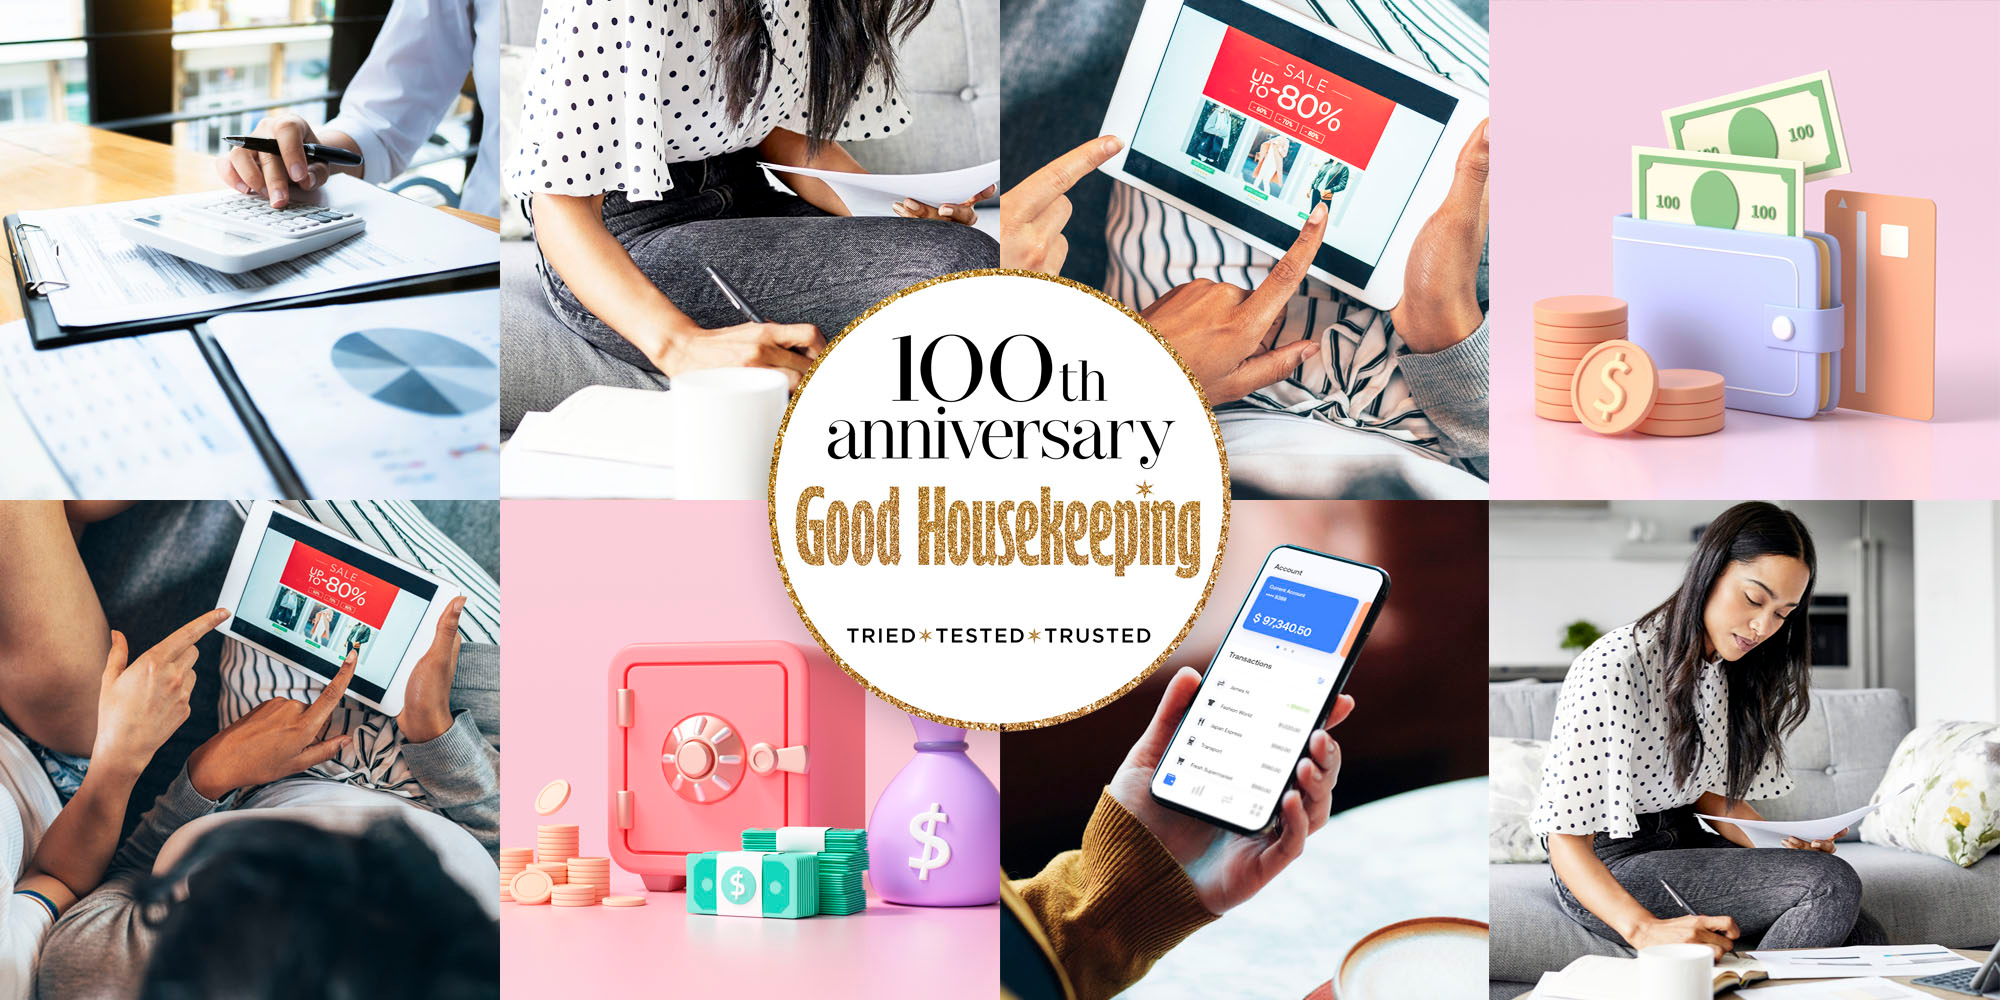 How to save money with our 100 best tips – Good Housekeeping